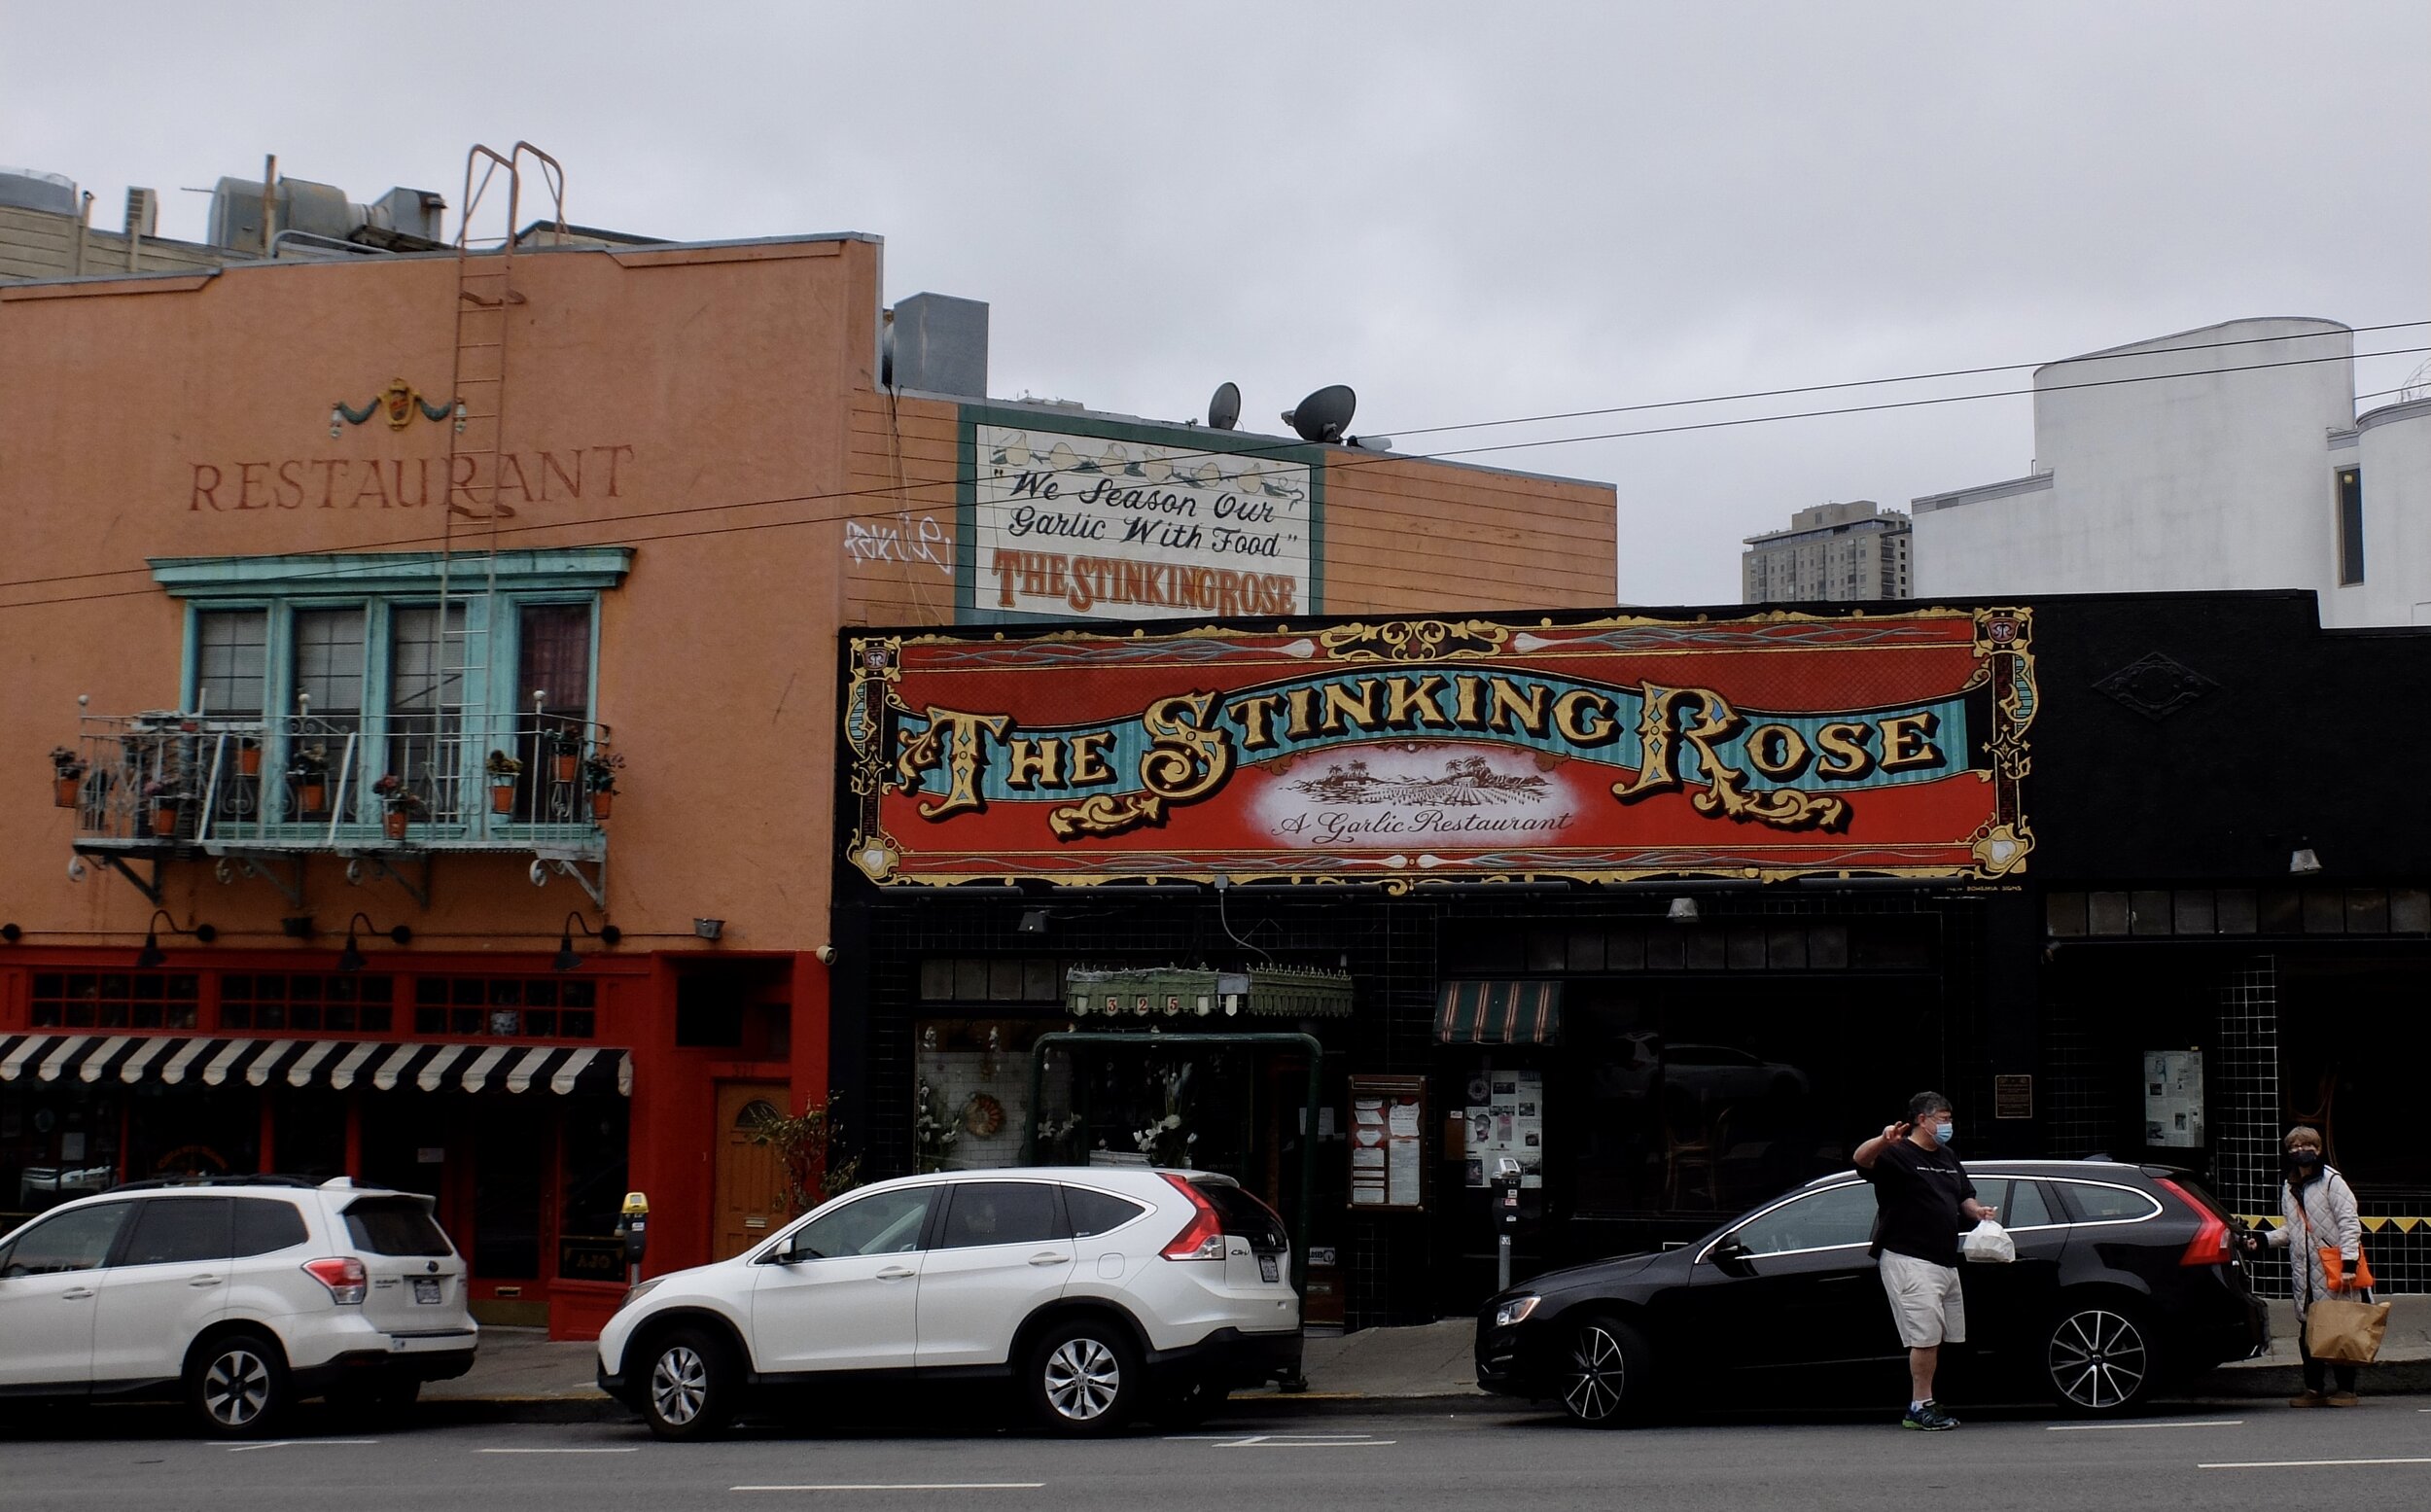 Good spot in front of The Stinking Rose.  We had eaten there decades ago.   (Copy)